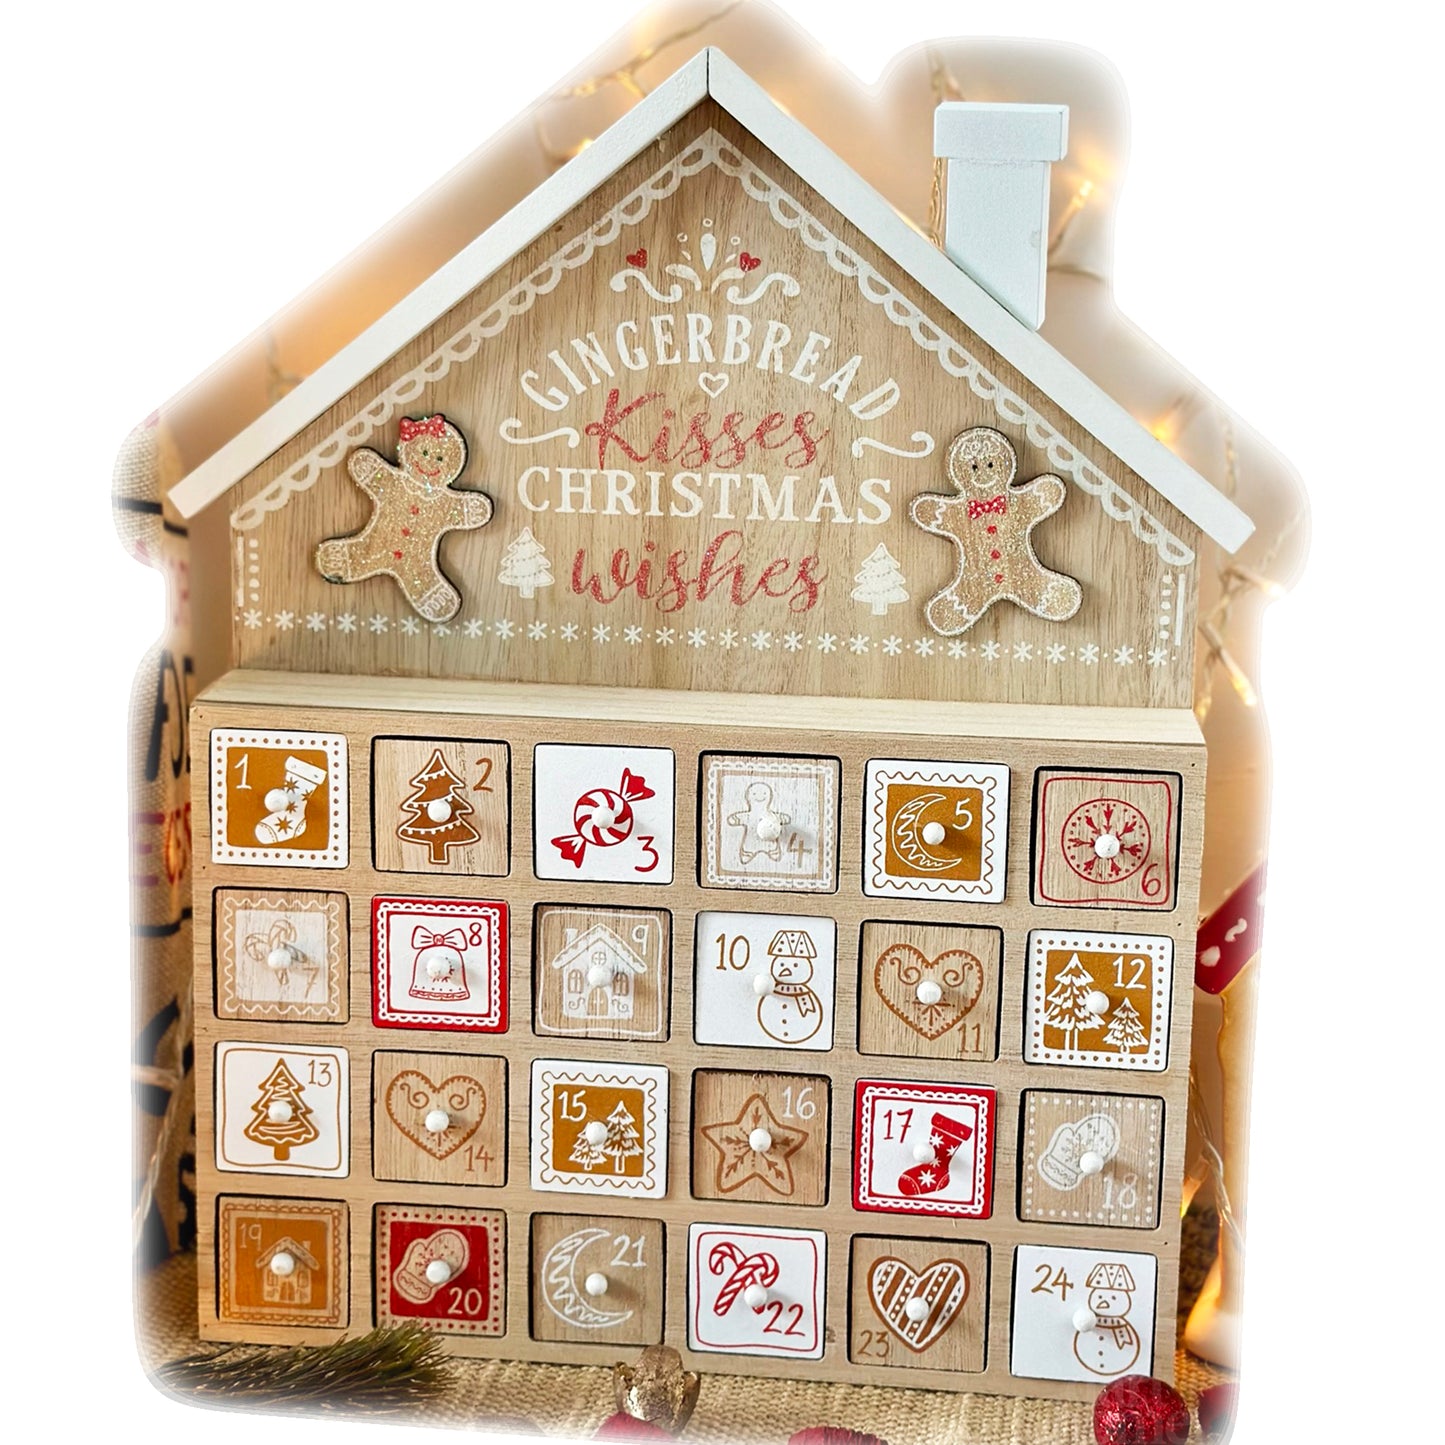 Gingerbread Christmas Wishes Advent Calendar